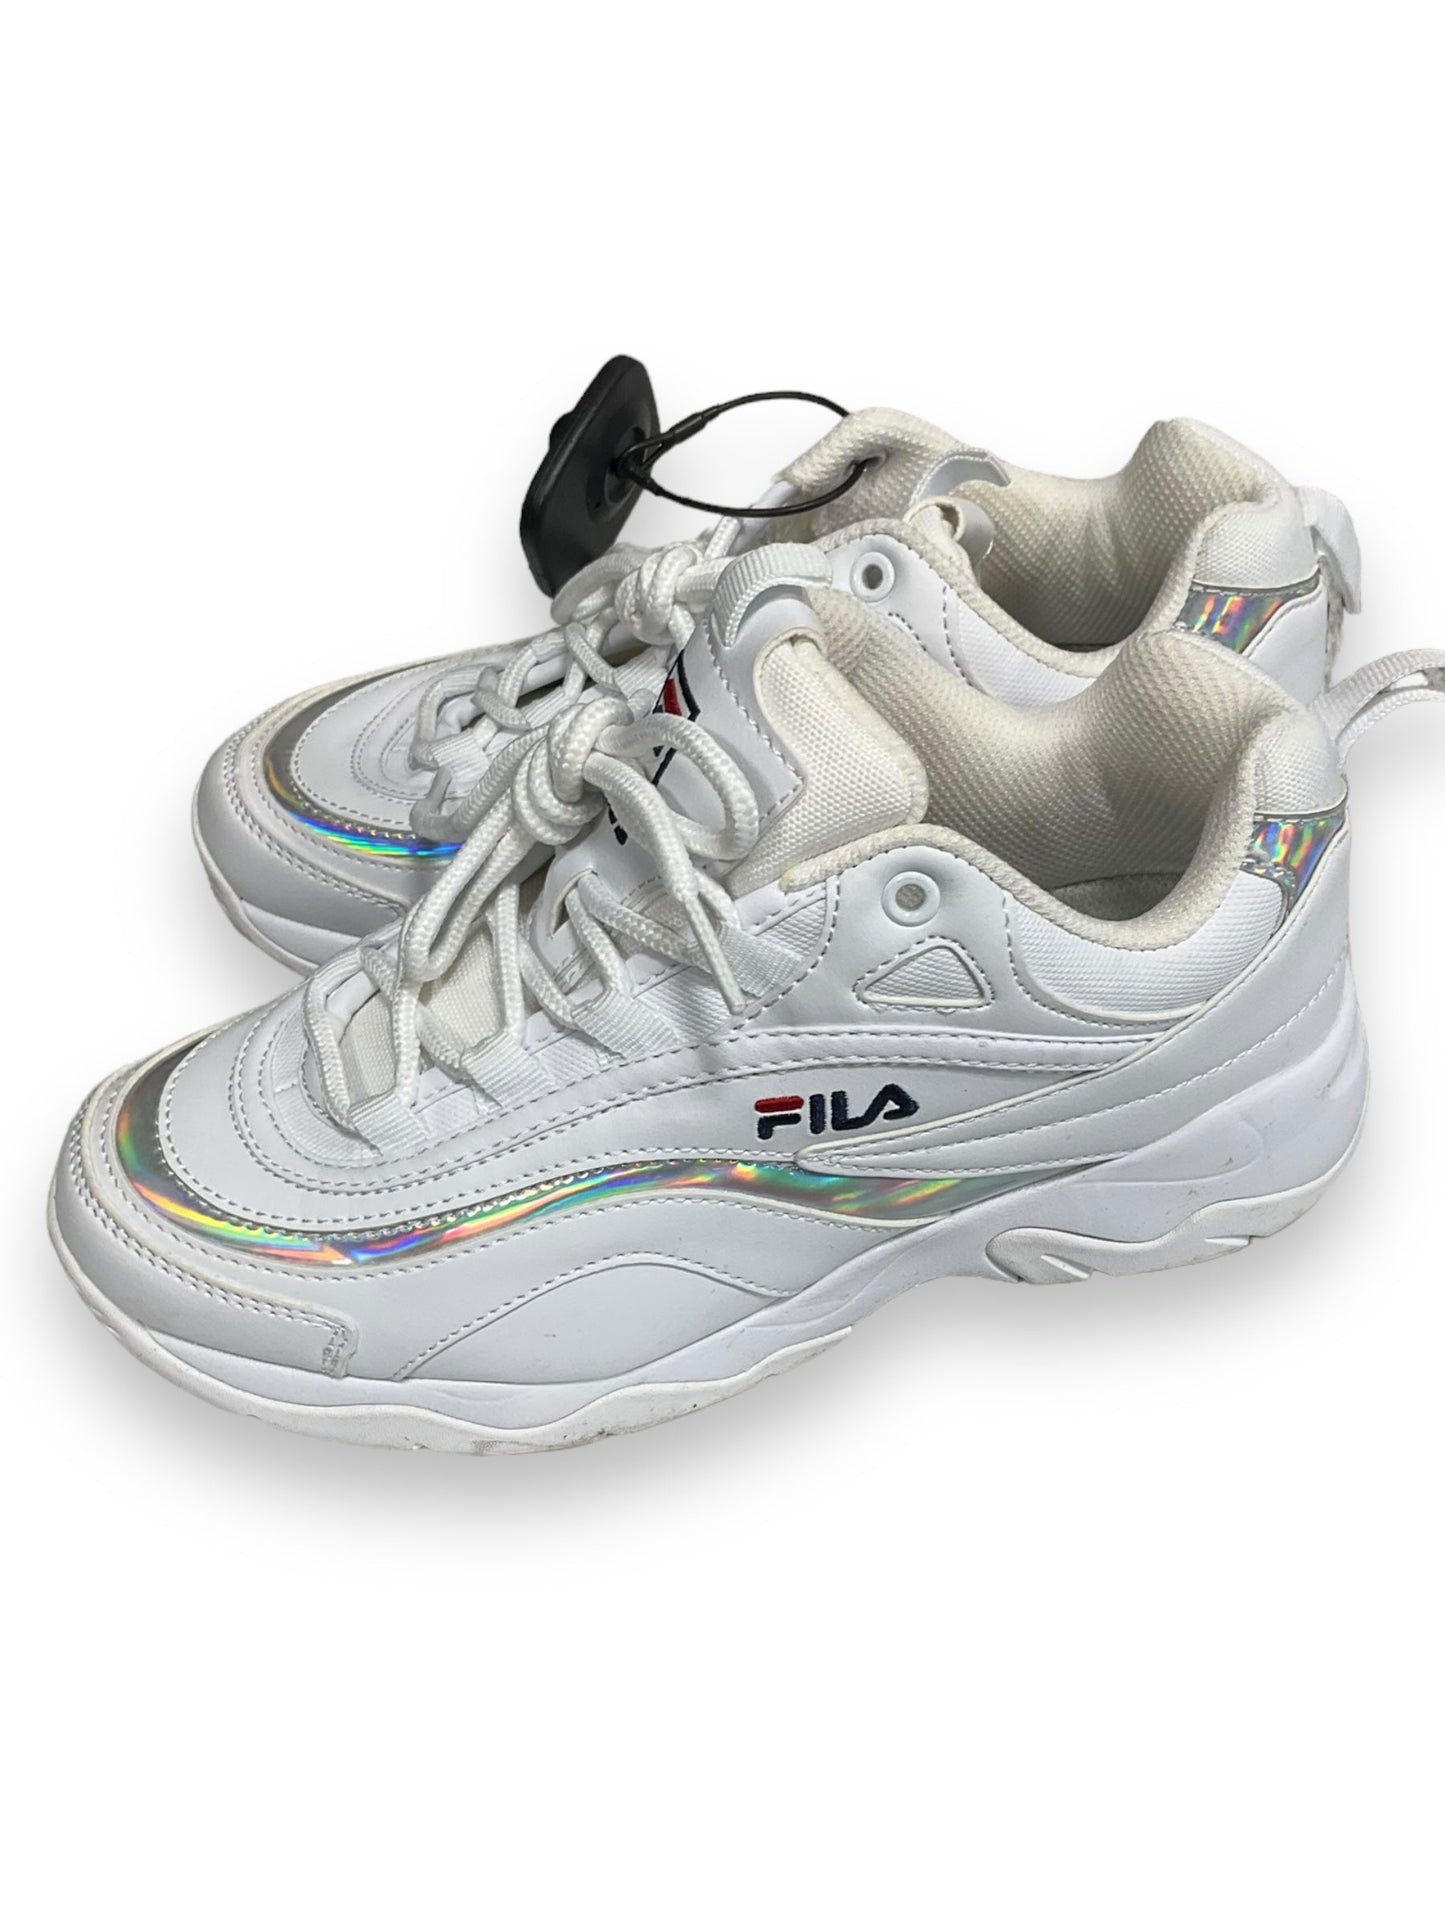 Shoes Athletic By Fila  Size: 6.5